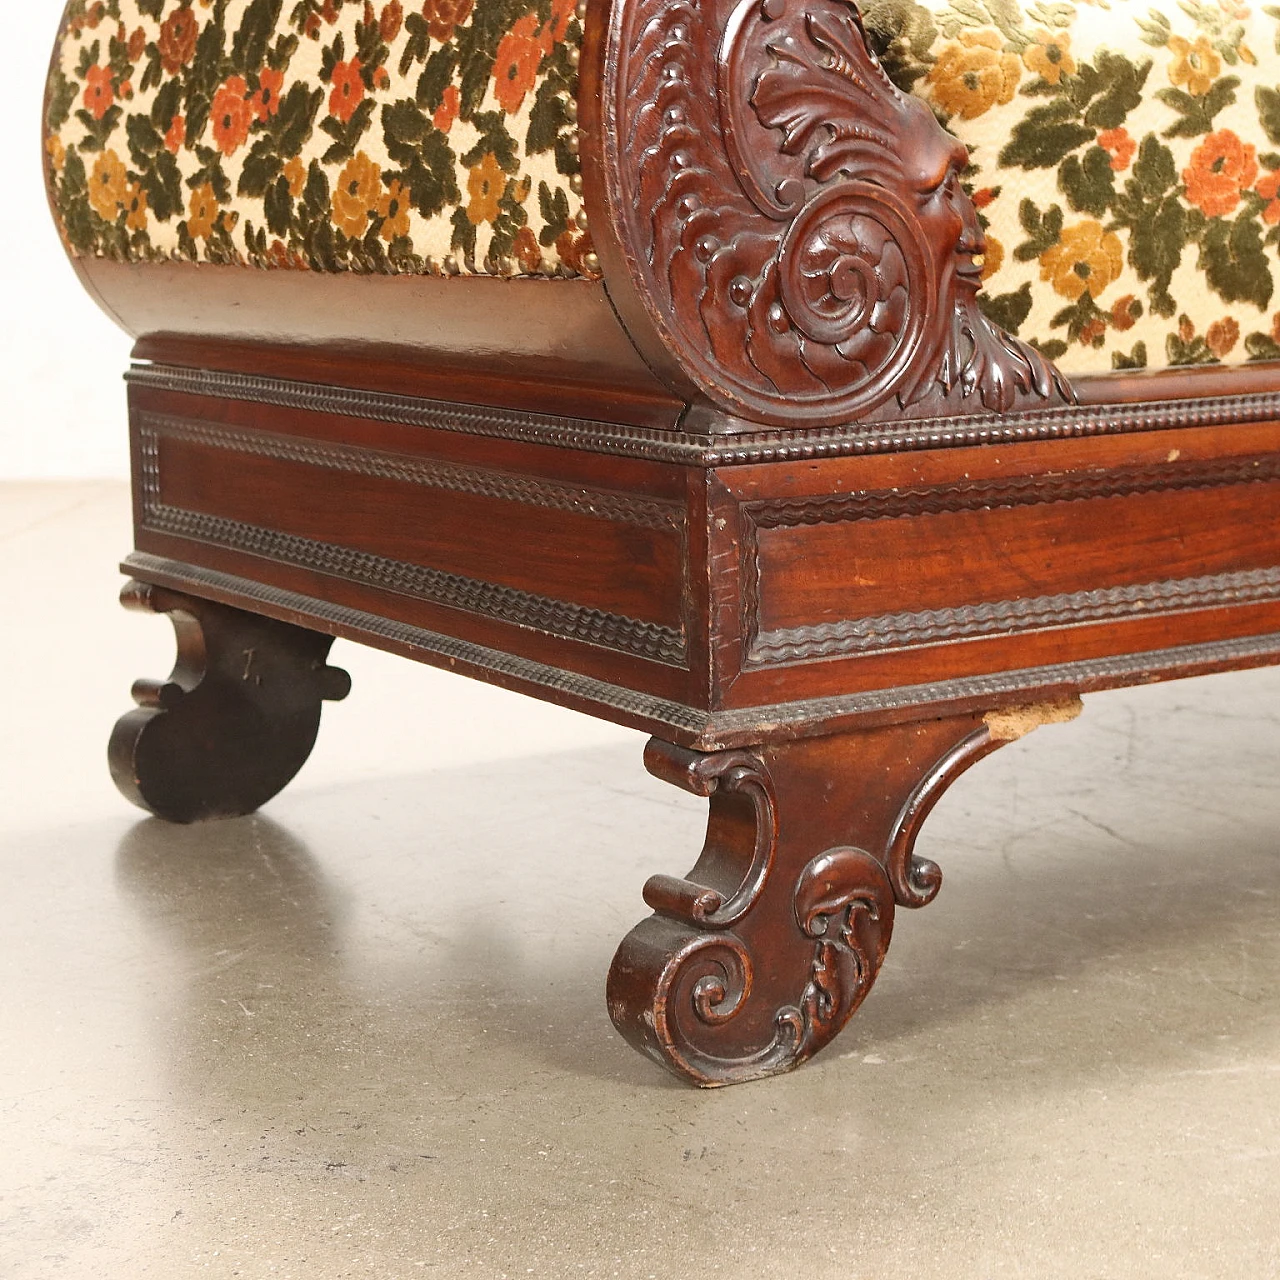 Mahogany sofa with carved leaf motifs and floral fabric, 19th century 7